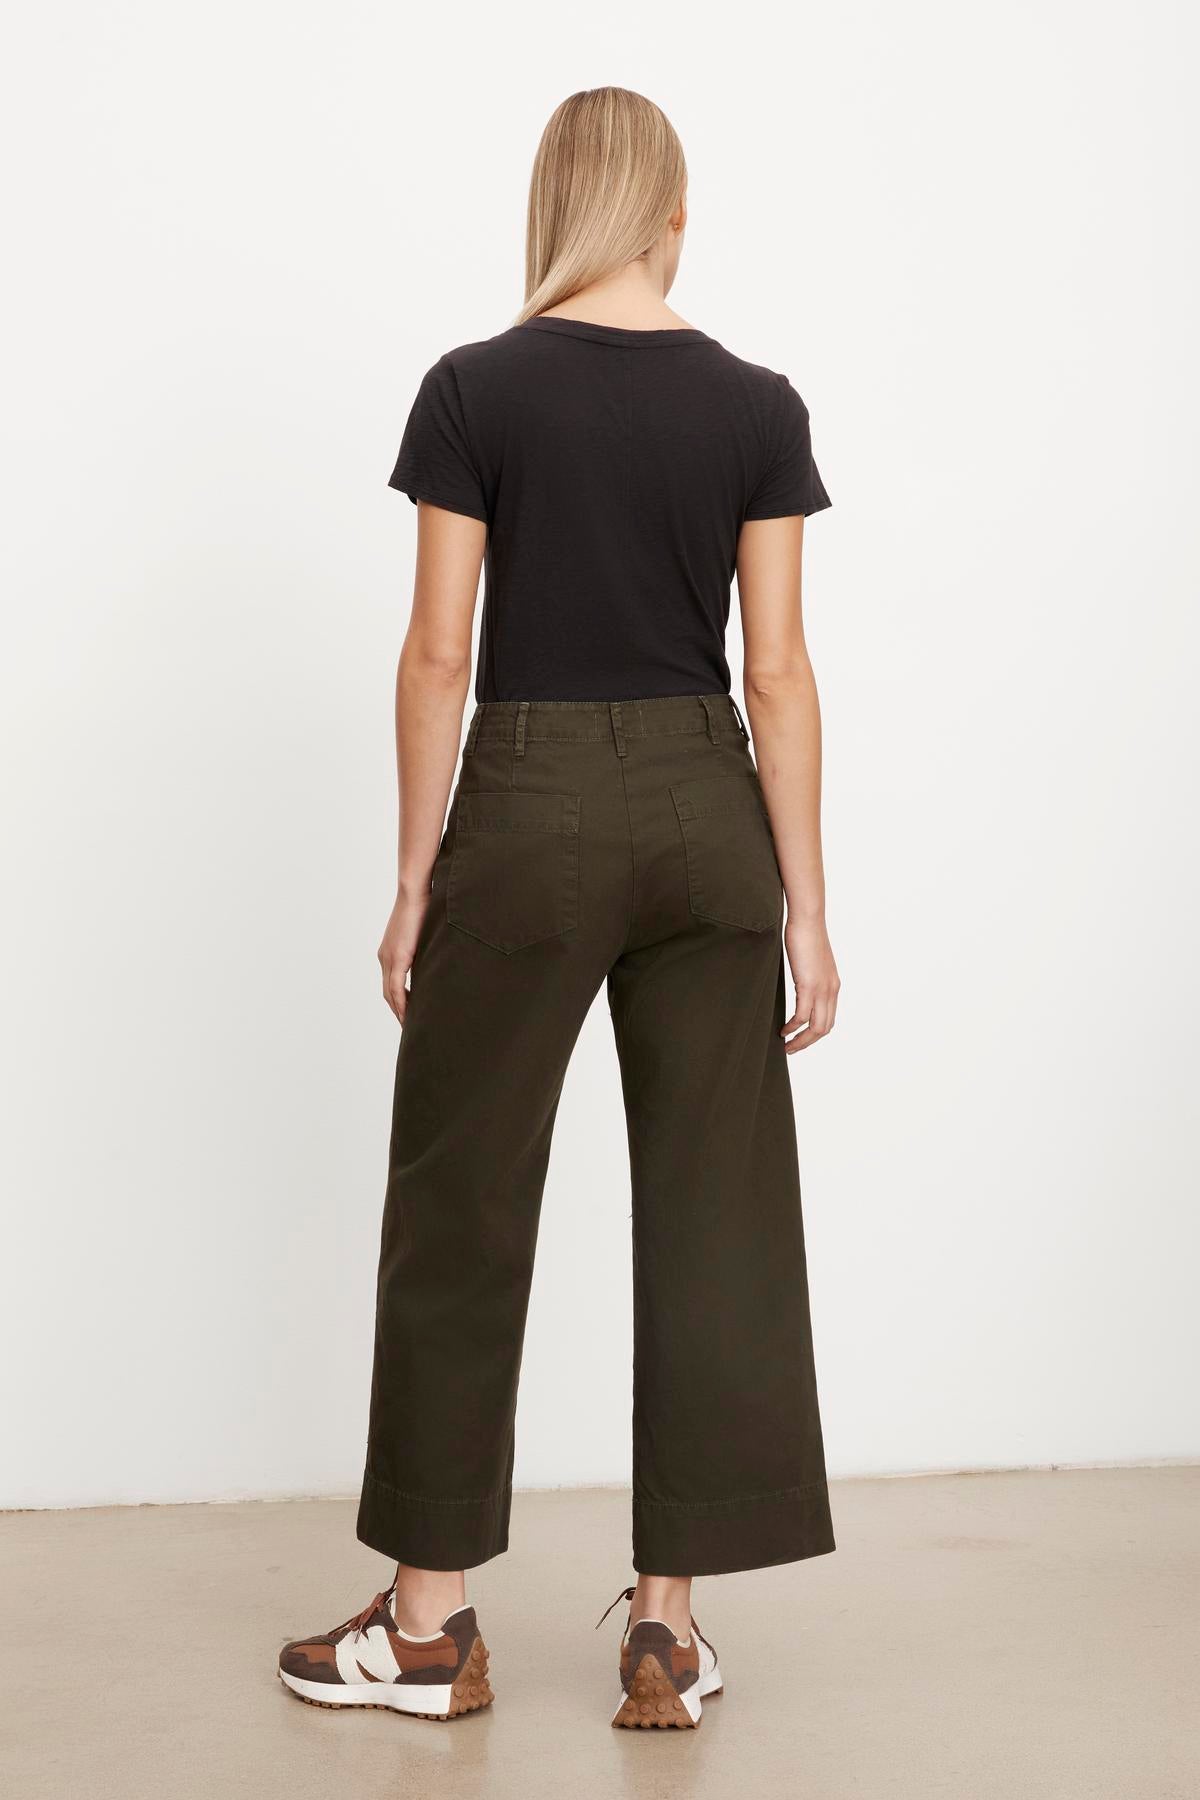 The back view of a woman wearing Velvet by Graham & Spencer's MYA COTTON CANVAS PANT in olive green cropped trousers.-36320657178817